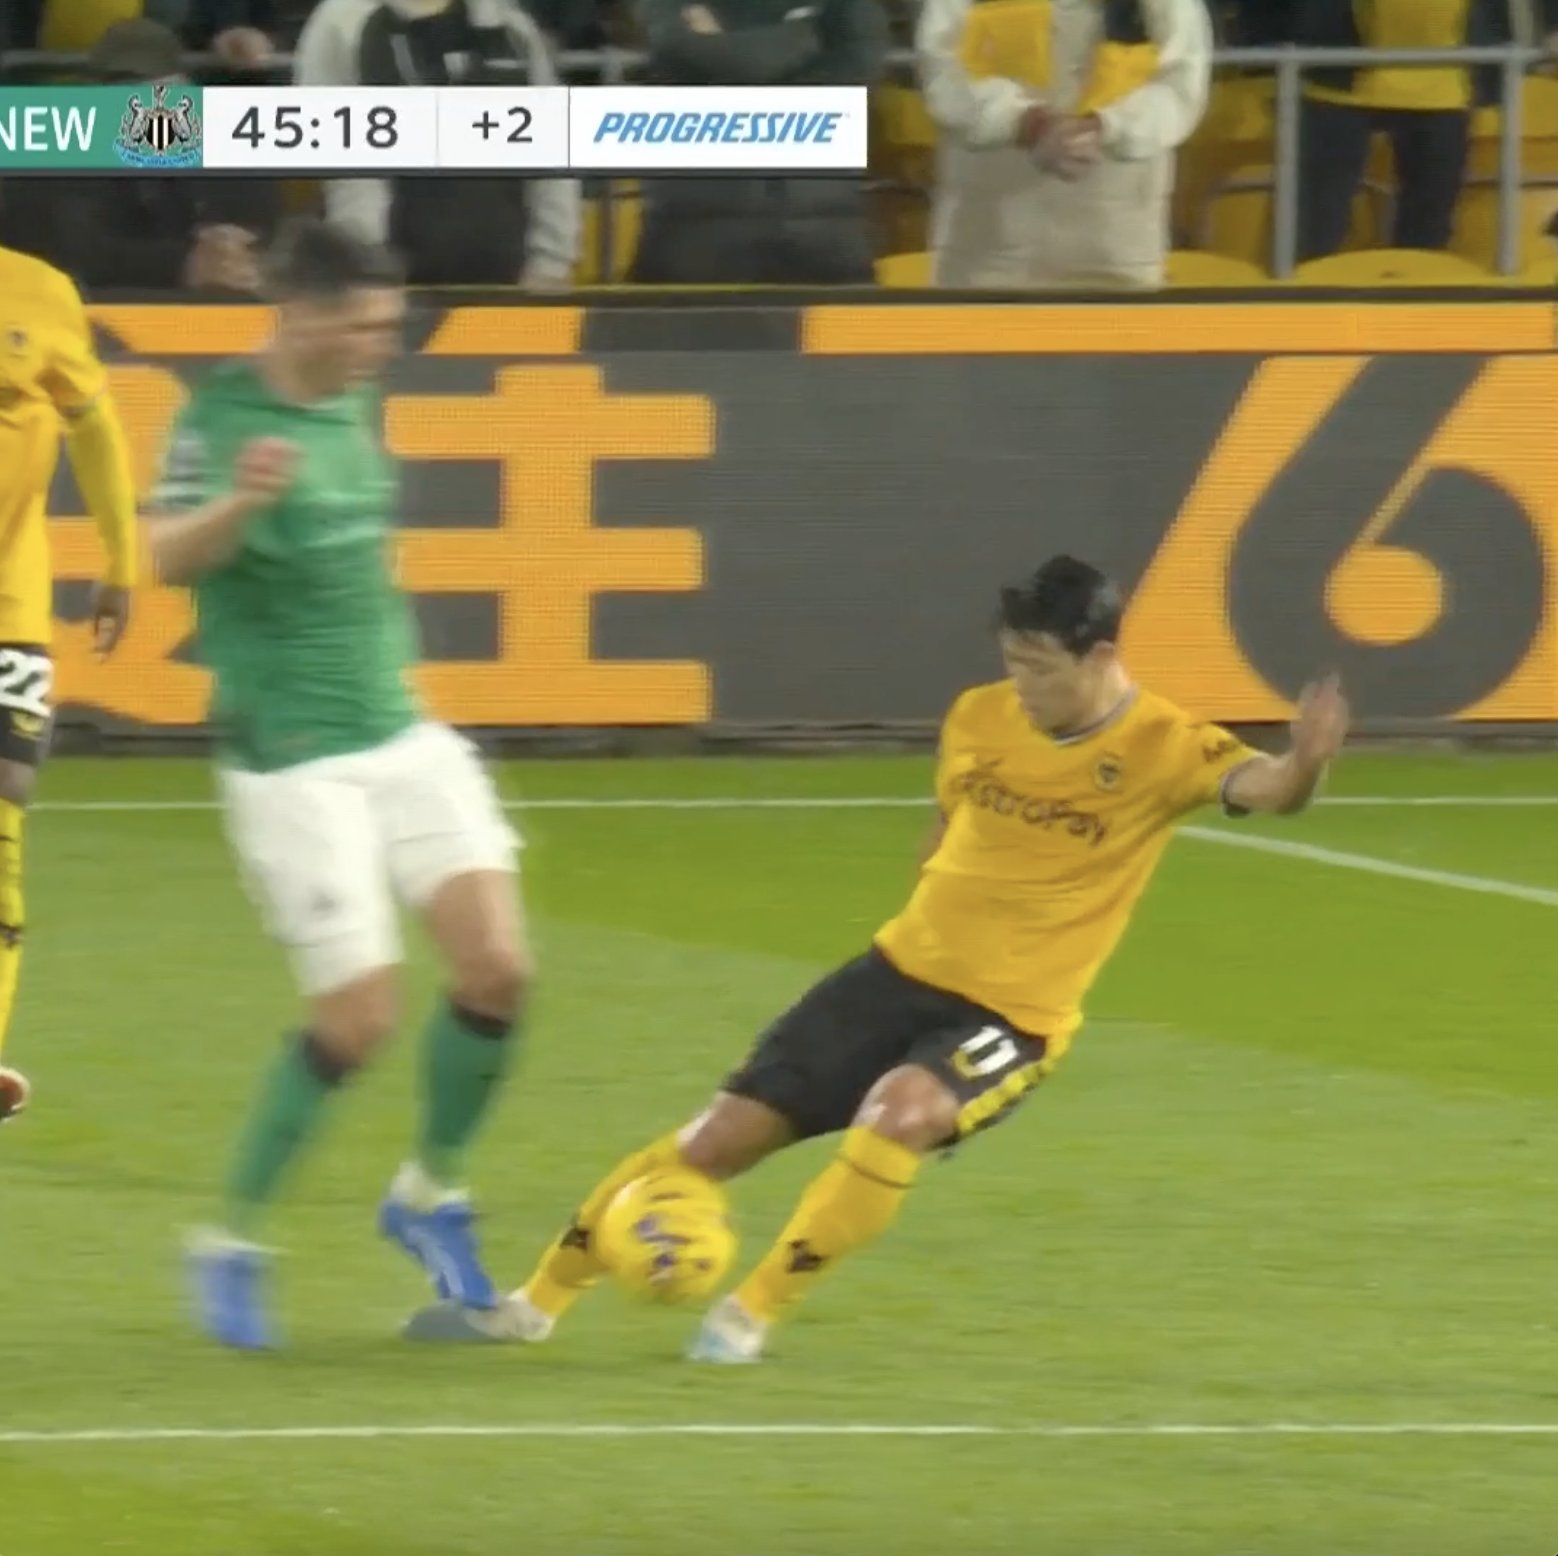 Newcastle United were awarded a penalty and took the lead after this challenge by Hwang Hee-Chan on Fabian Schar. #WOLNEW